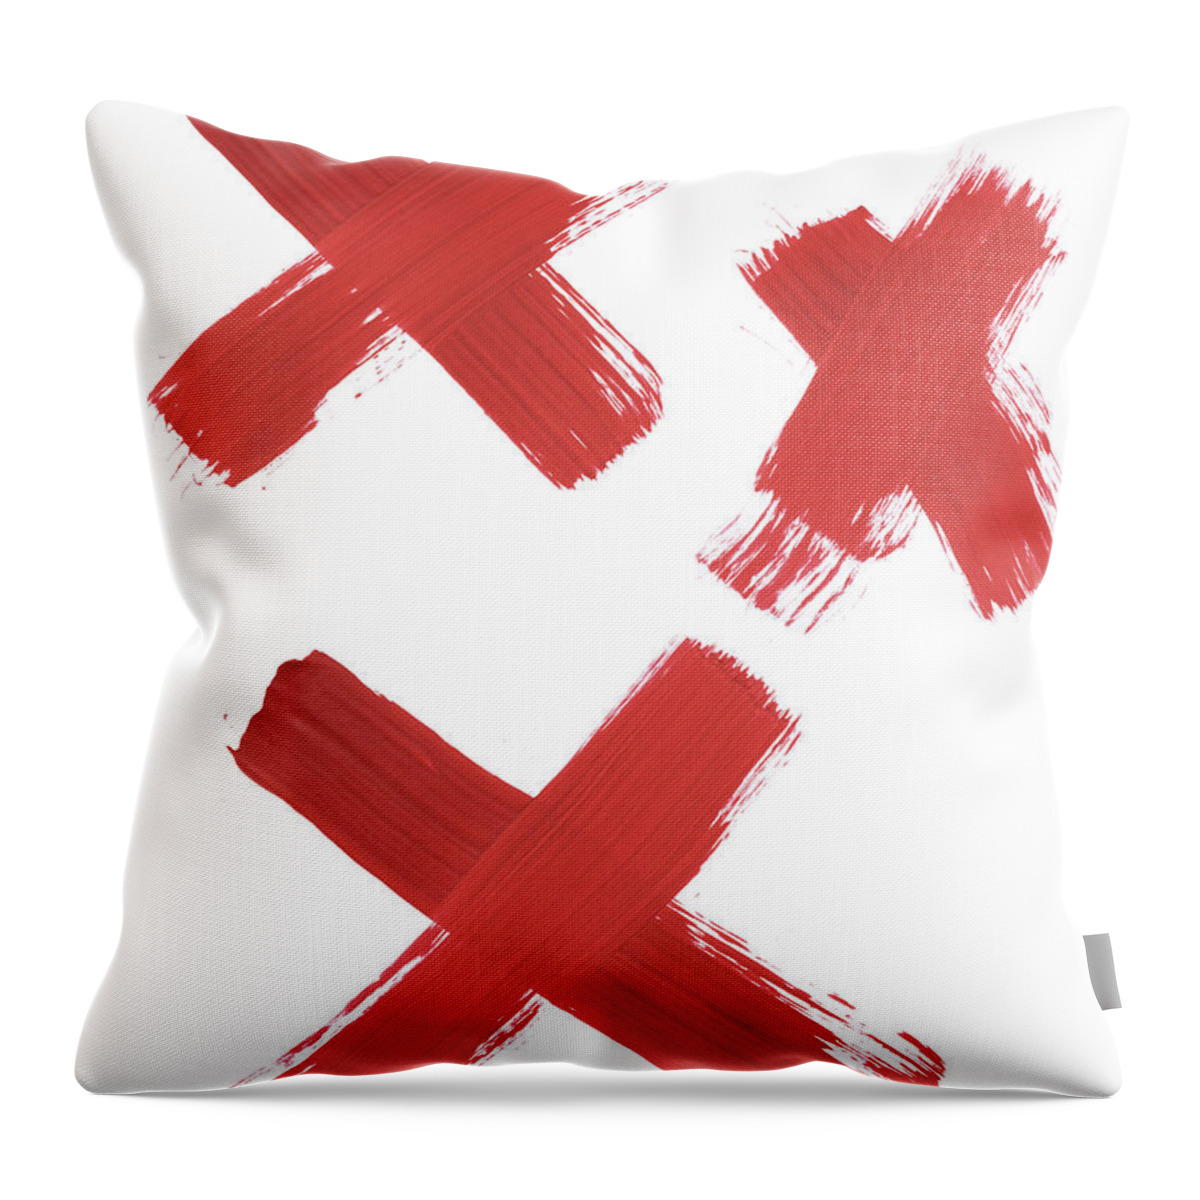 Letter X Throw Pillow featuring the photograph Three Thickly Painted Red Exes by Kevinruss